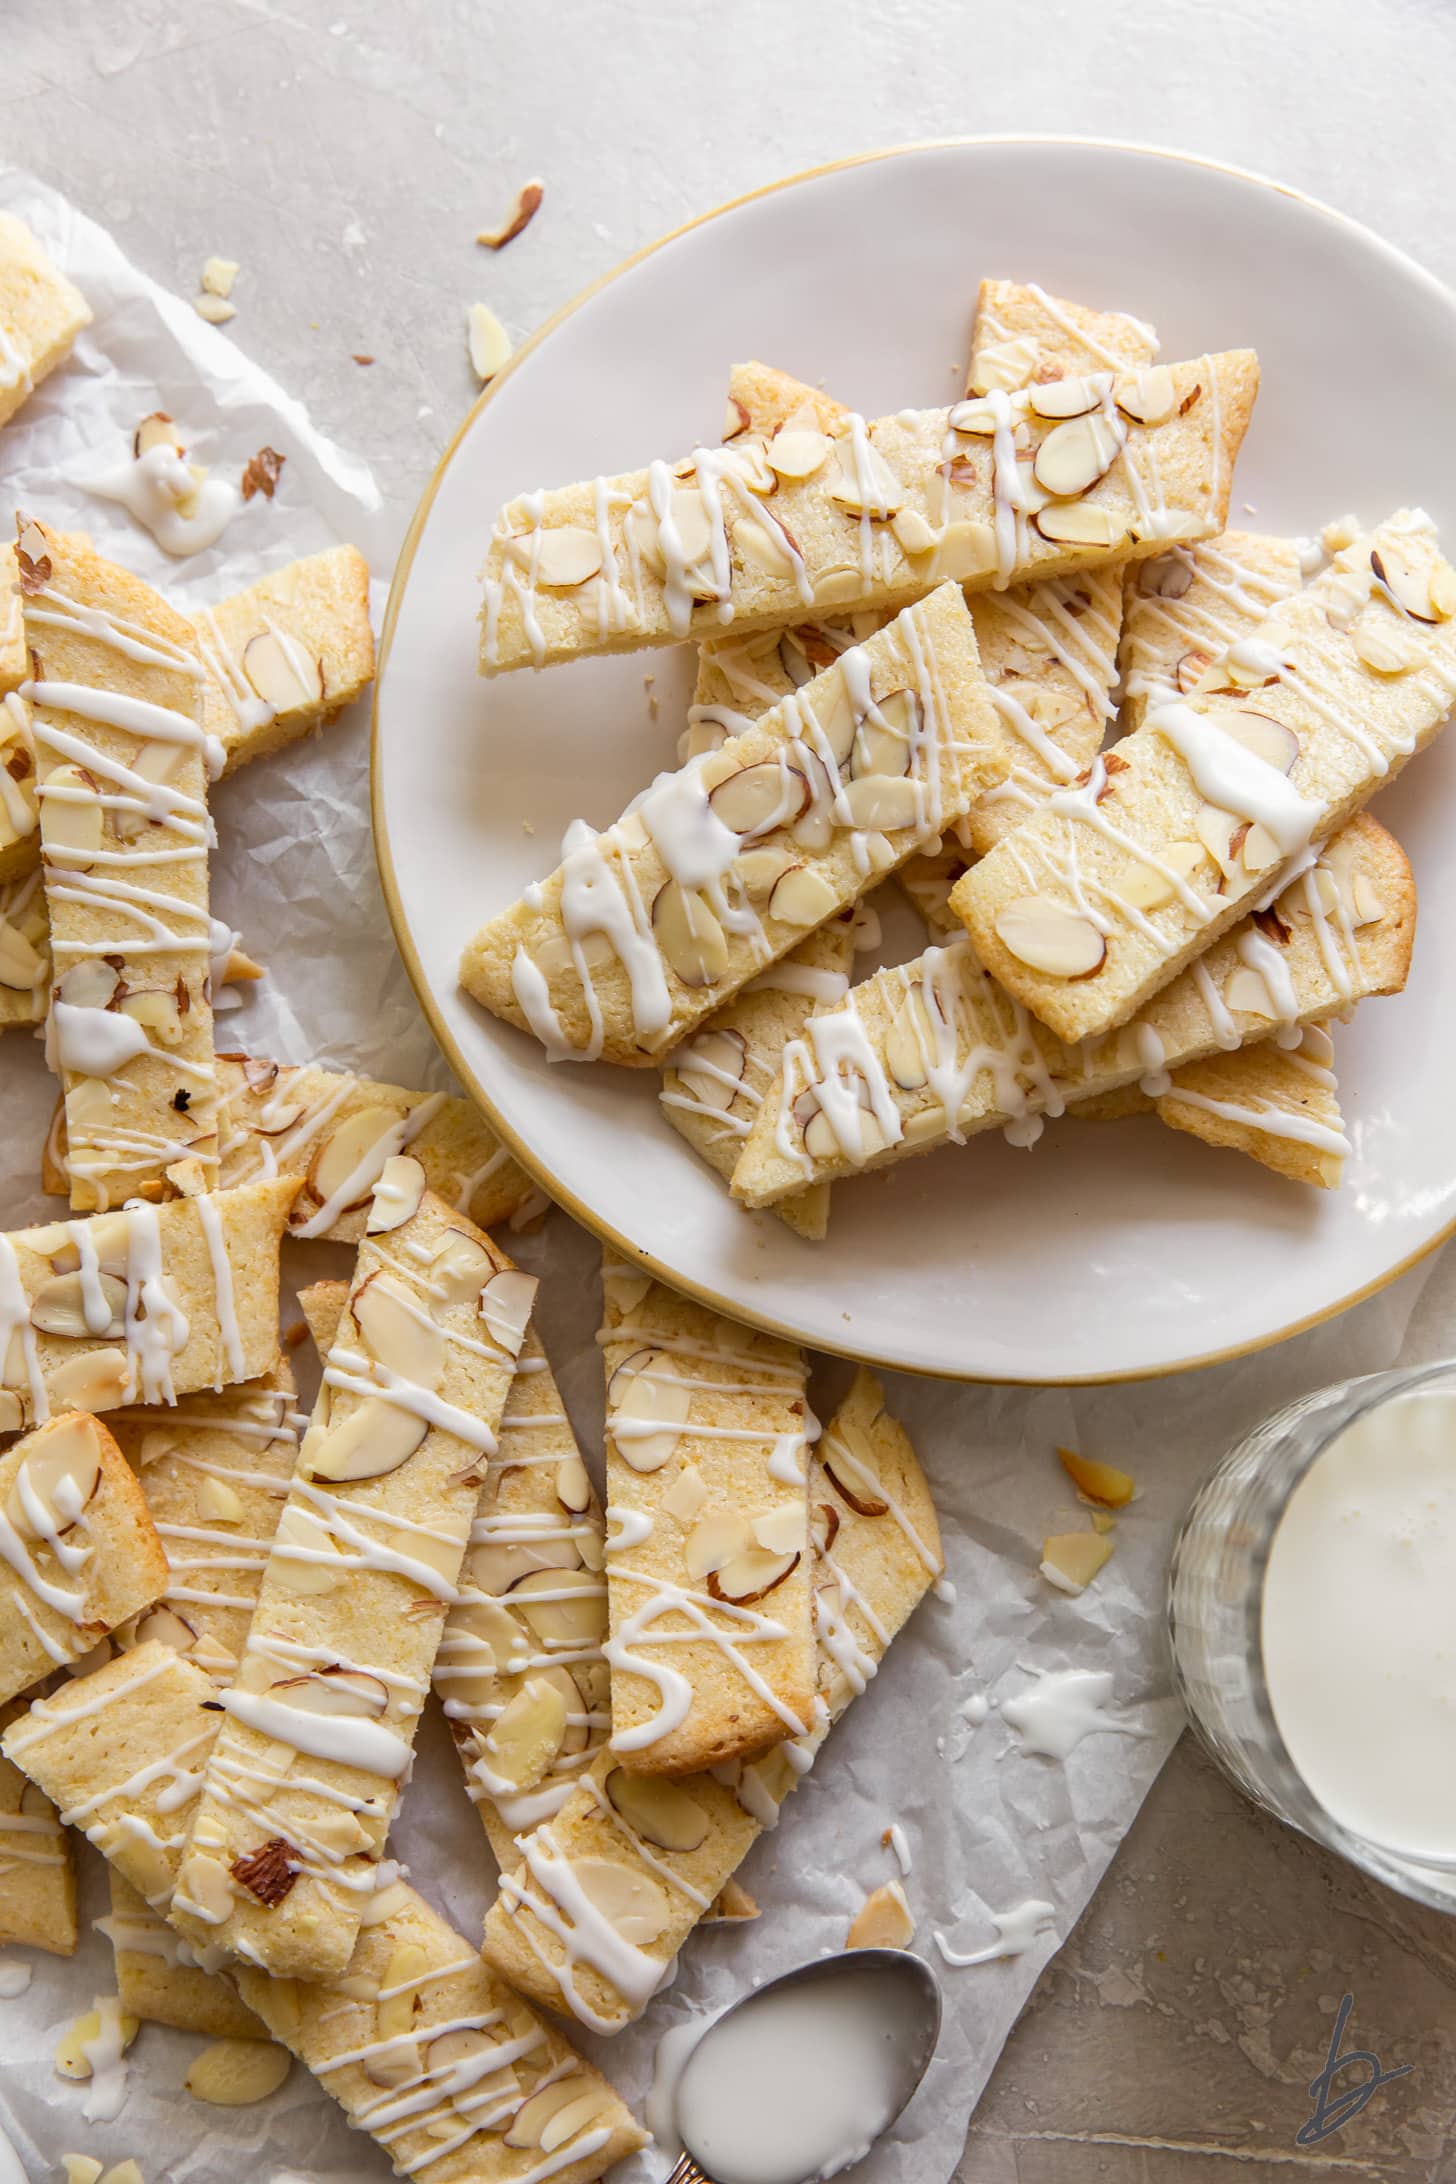 plate of scandinavian almond bars next to more bars on parchment paper and glass of milk